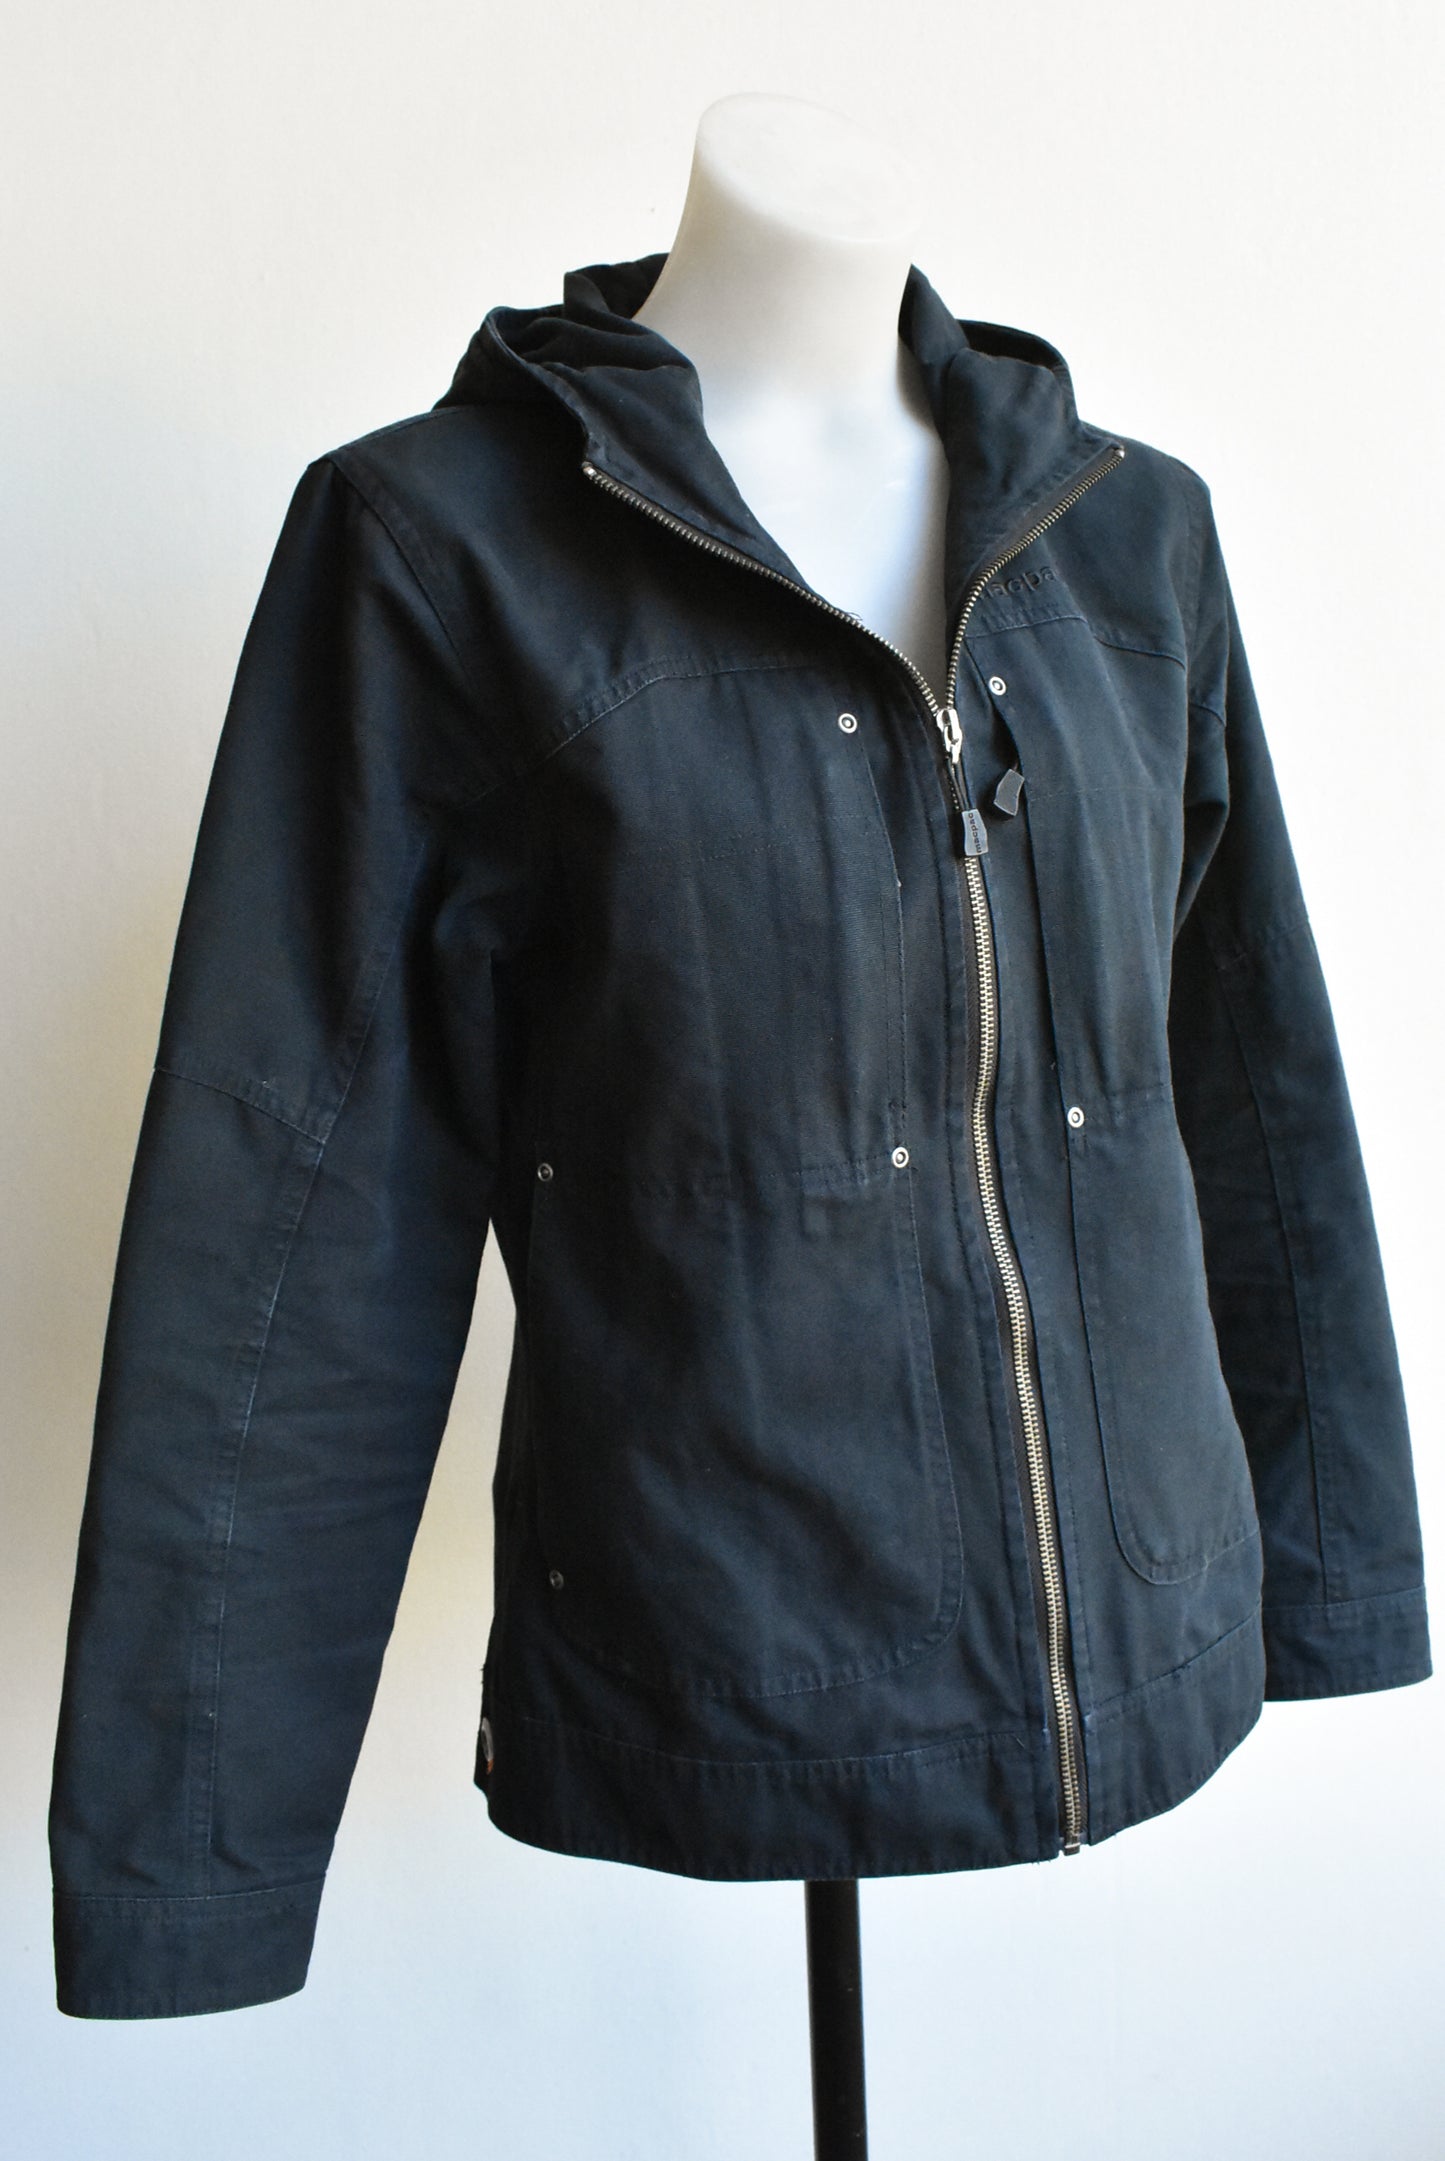 Macpac canvas jacket with hood, size 10